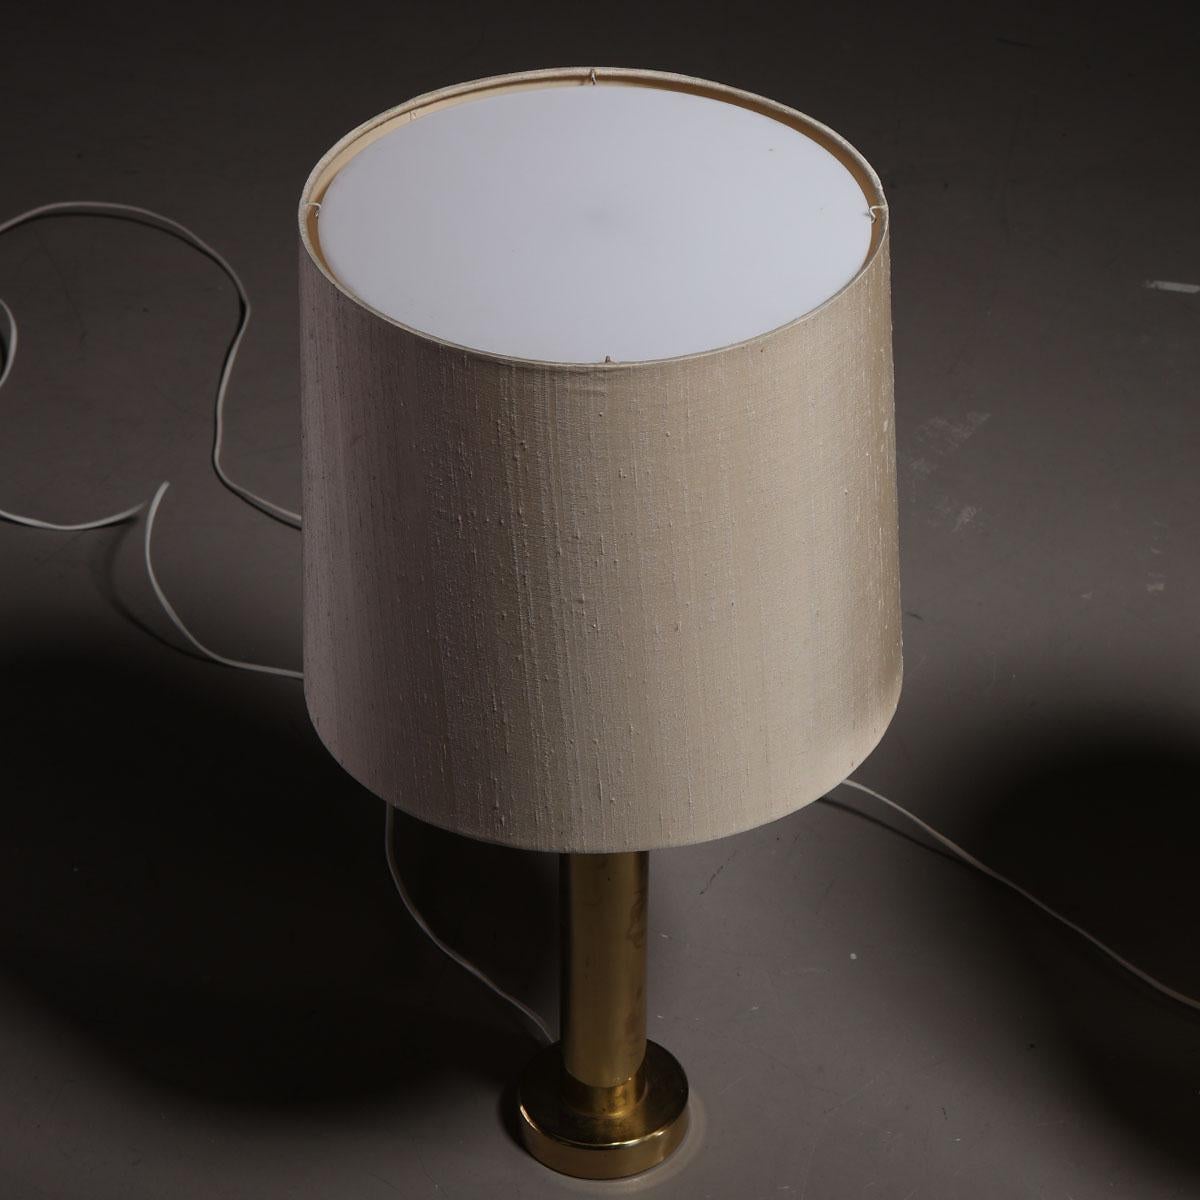 Scandinavian Modern Kosta Elarmatur Pair of Table Lamps in Brass and Cotton, 1970s For Sale